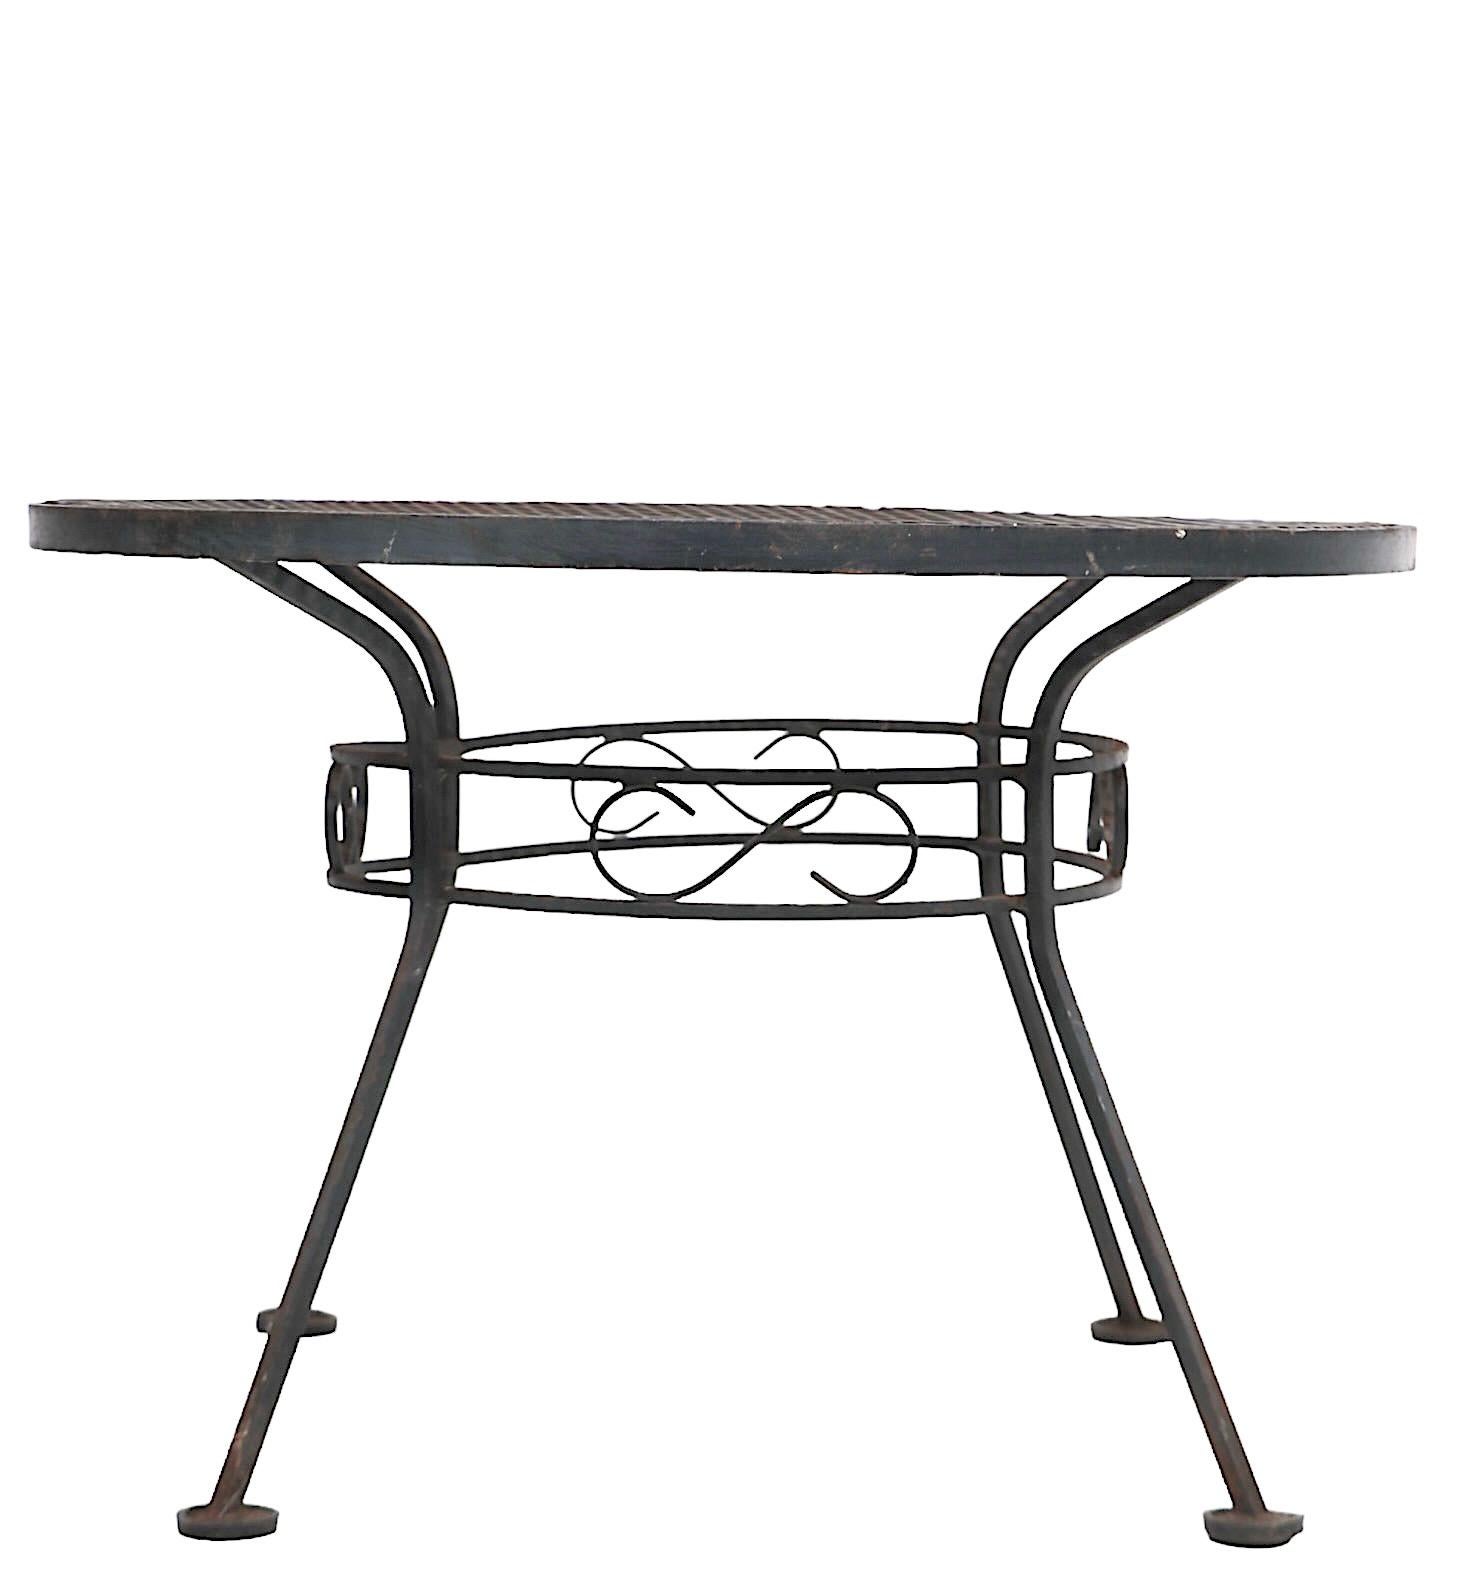  Small Wrought Iron  Garden Patio Poolside Table by Woodard c. 1940/60's For Sale 2